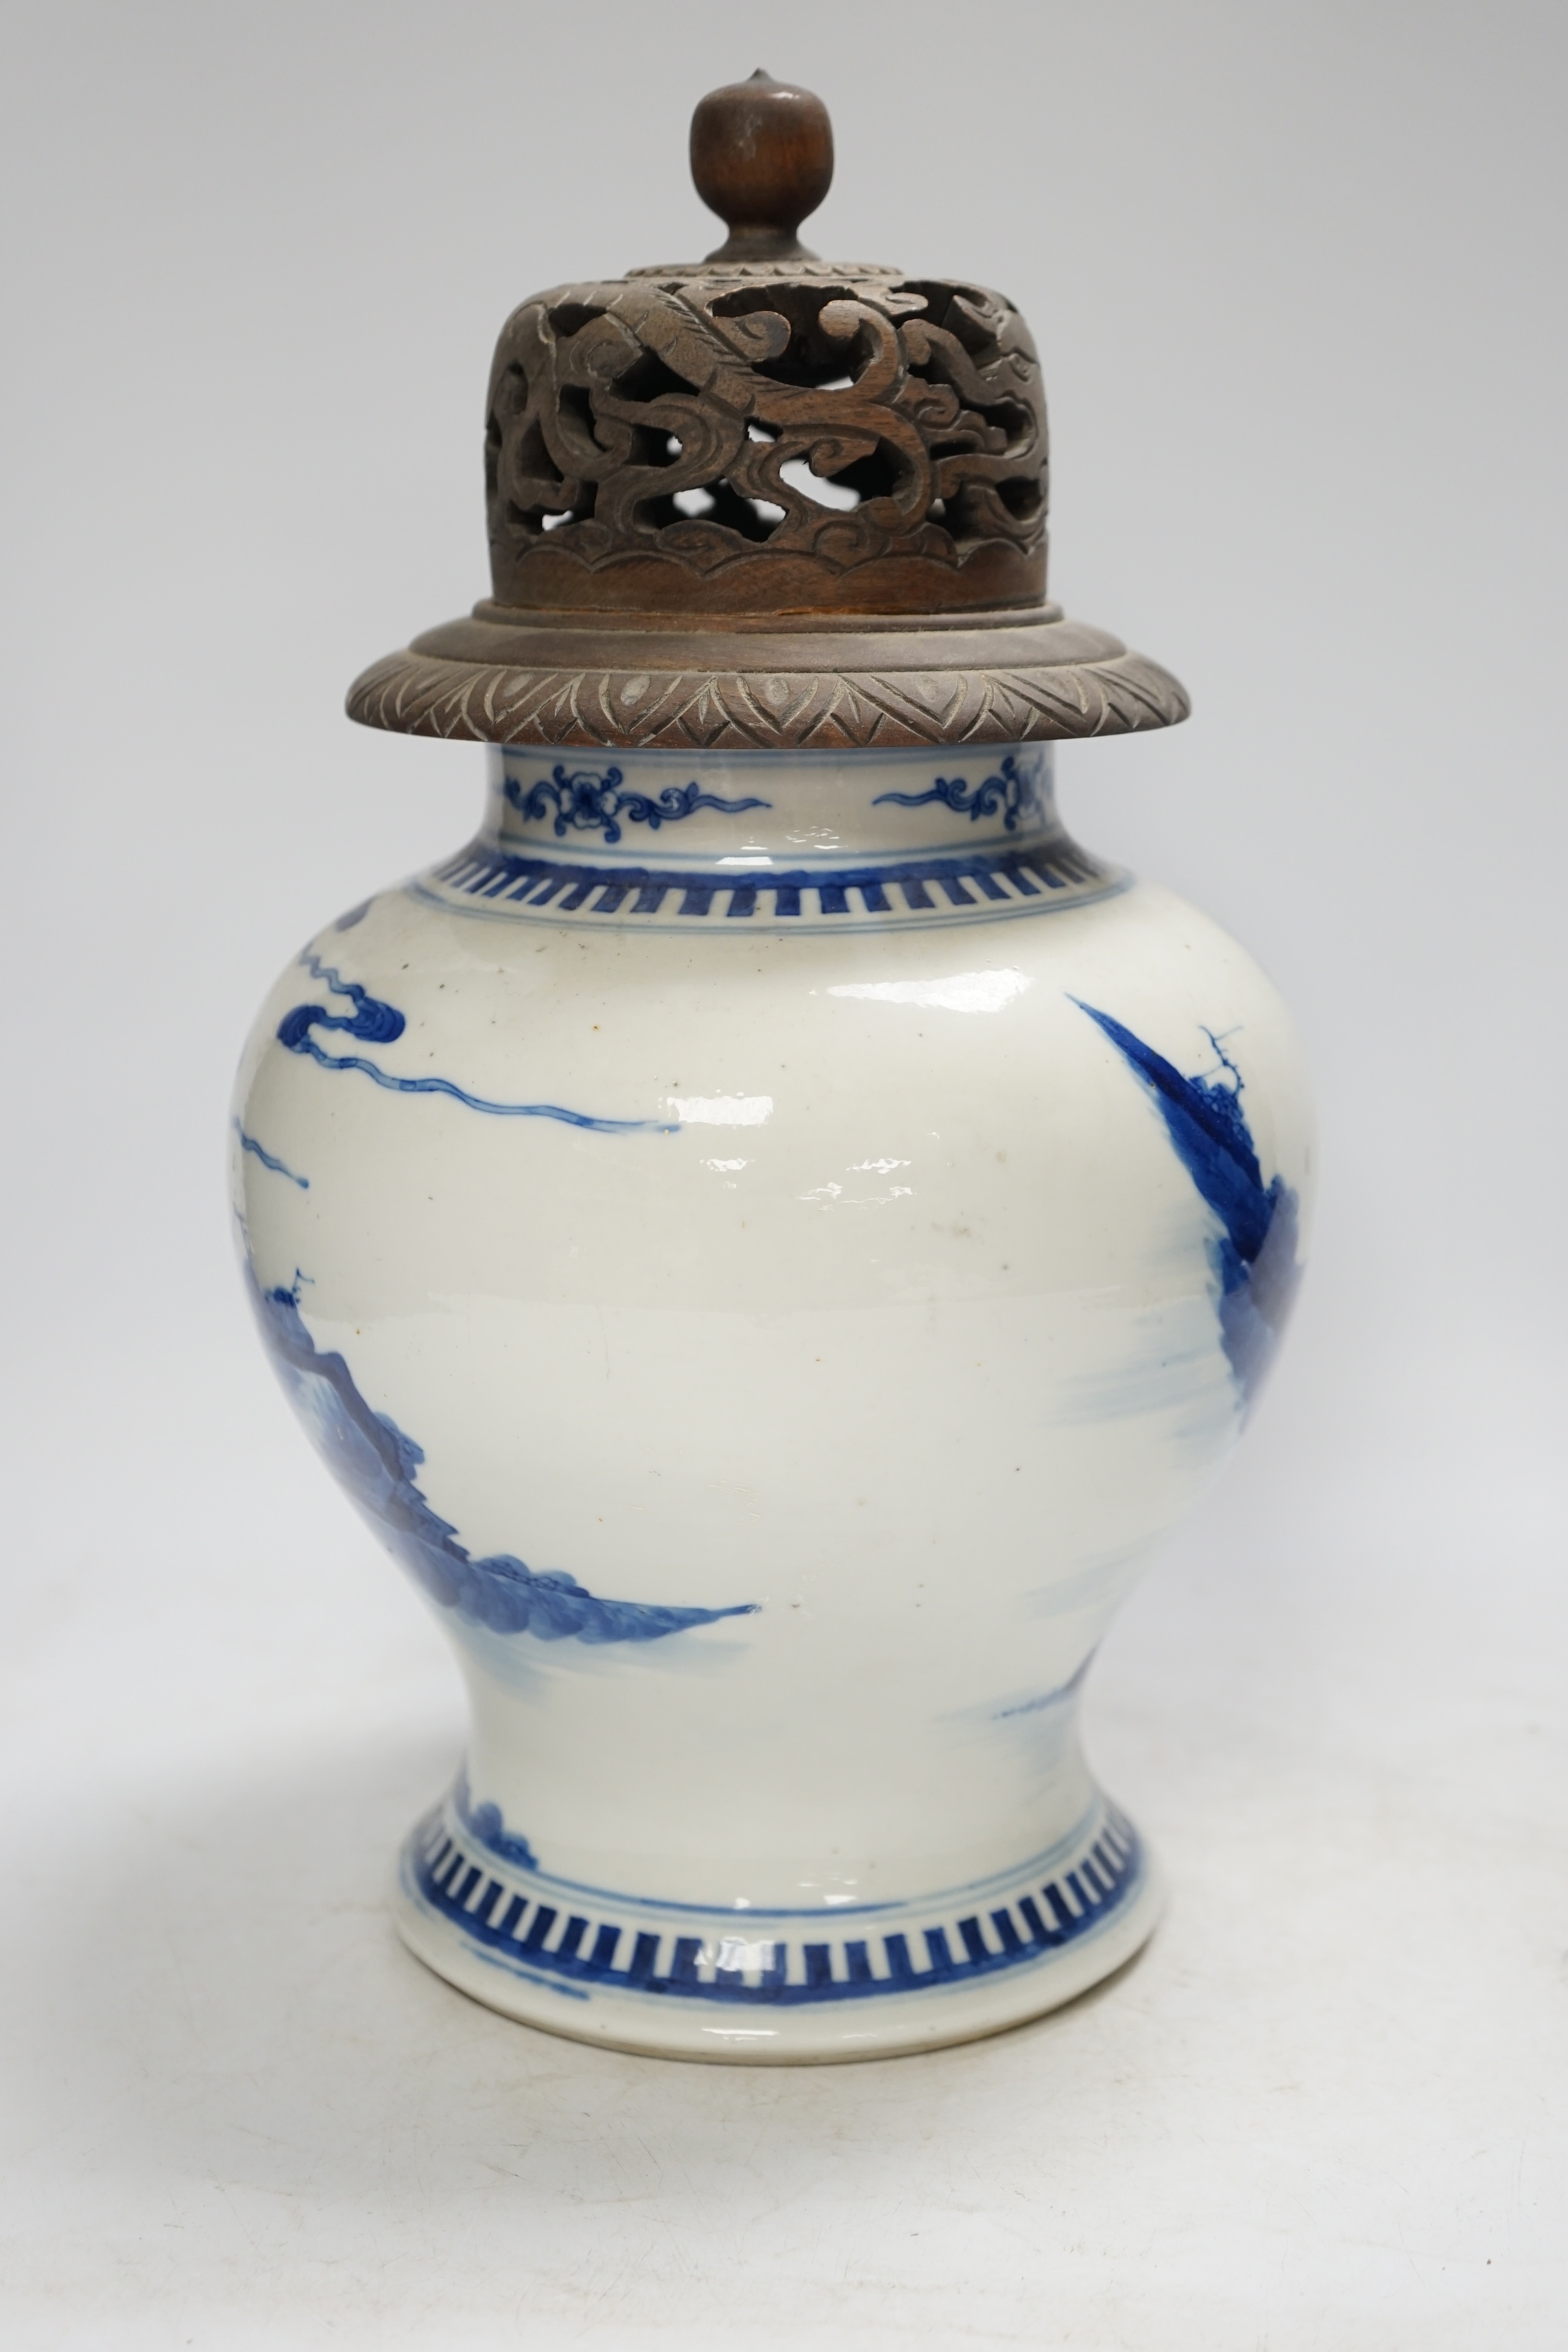 A 19th century Chinese blue and white baluster jar, painted with a scene from the Romance of the Western chamber, wood cover, 34cm. Condition - good